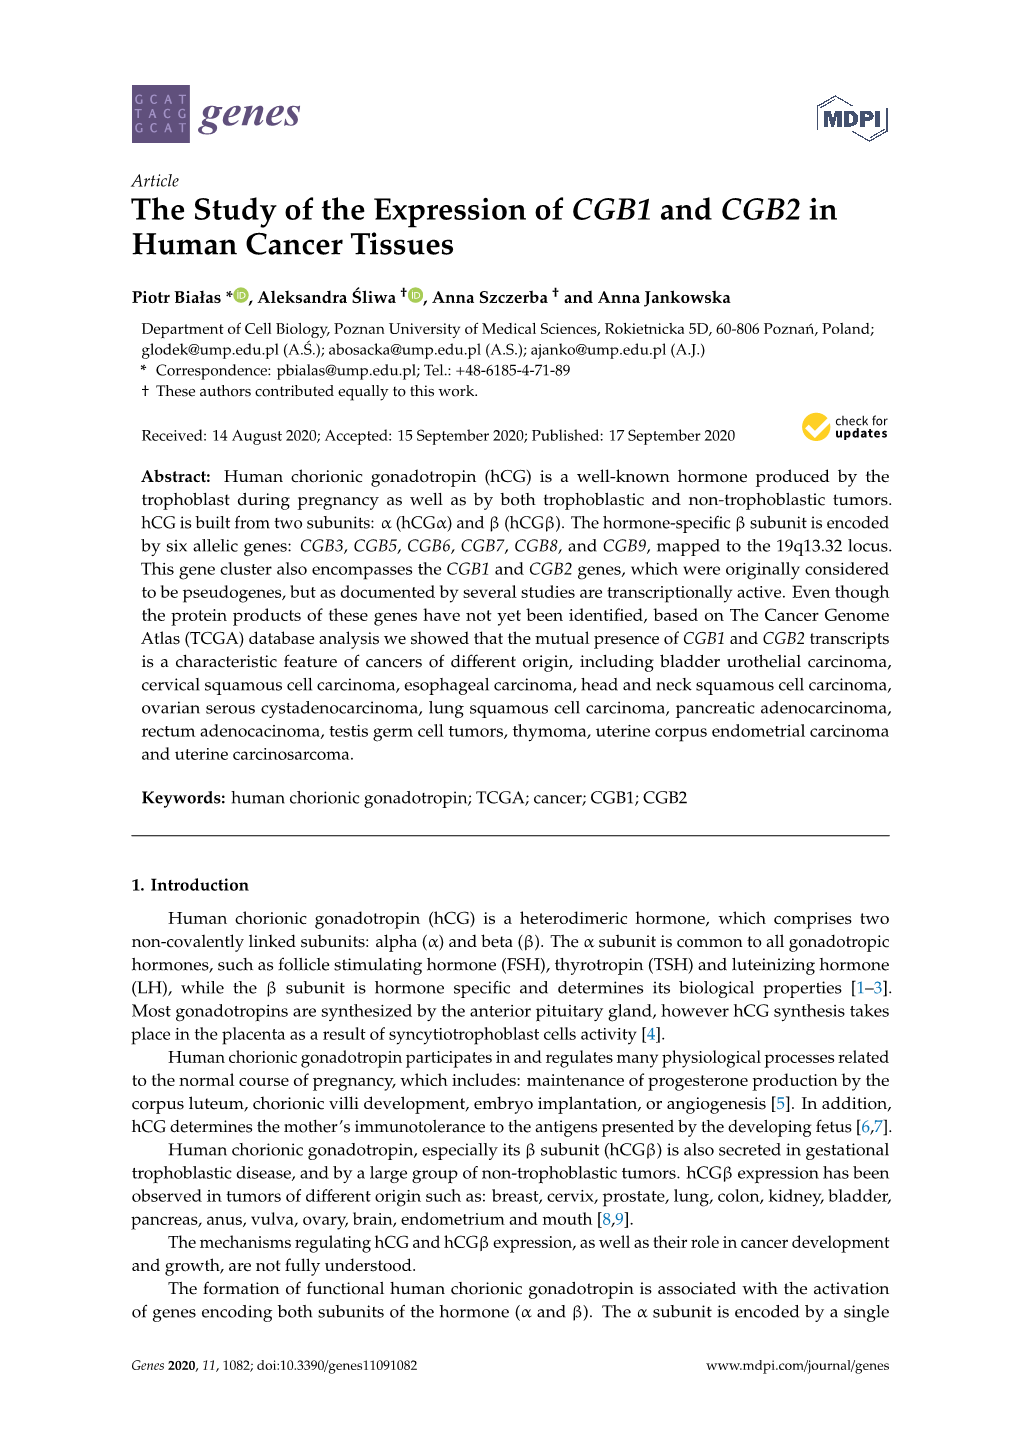 The Study of the Expression of CGB1 and CGB2 in Human Cancer Tissues